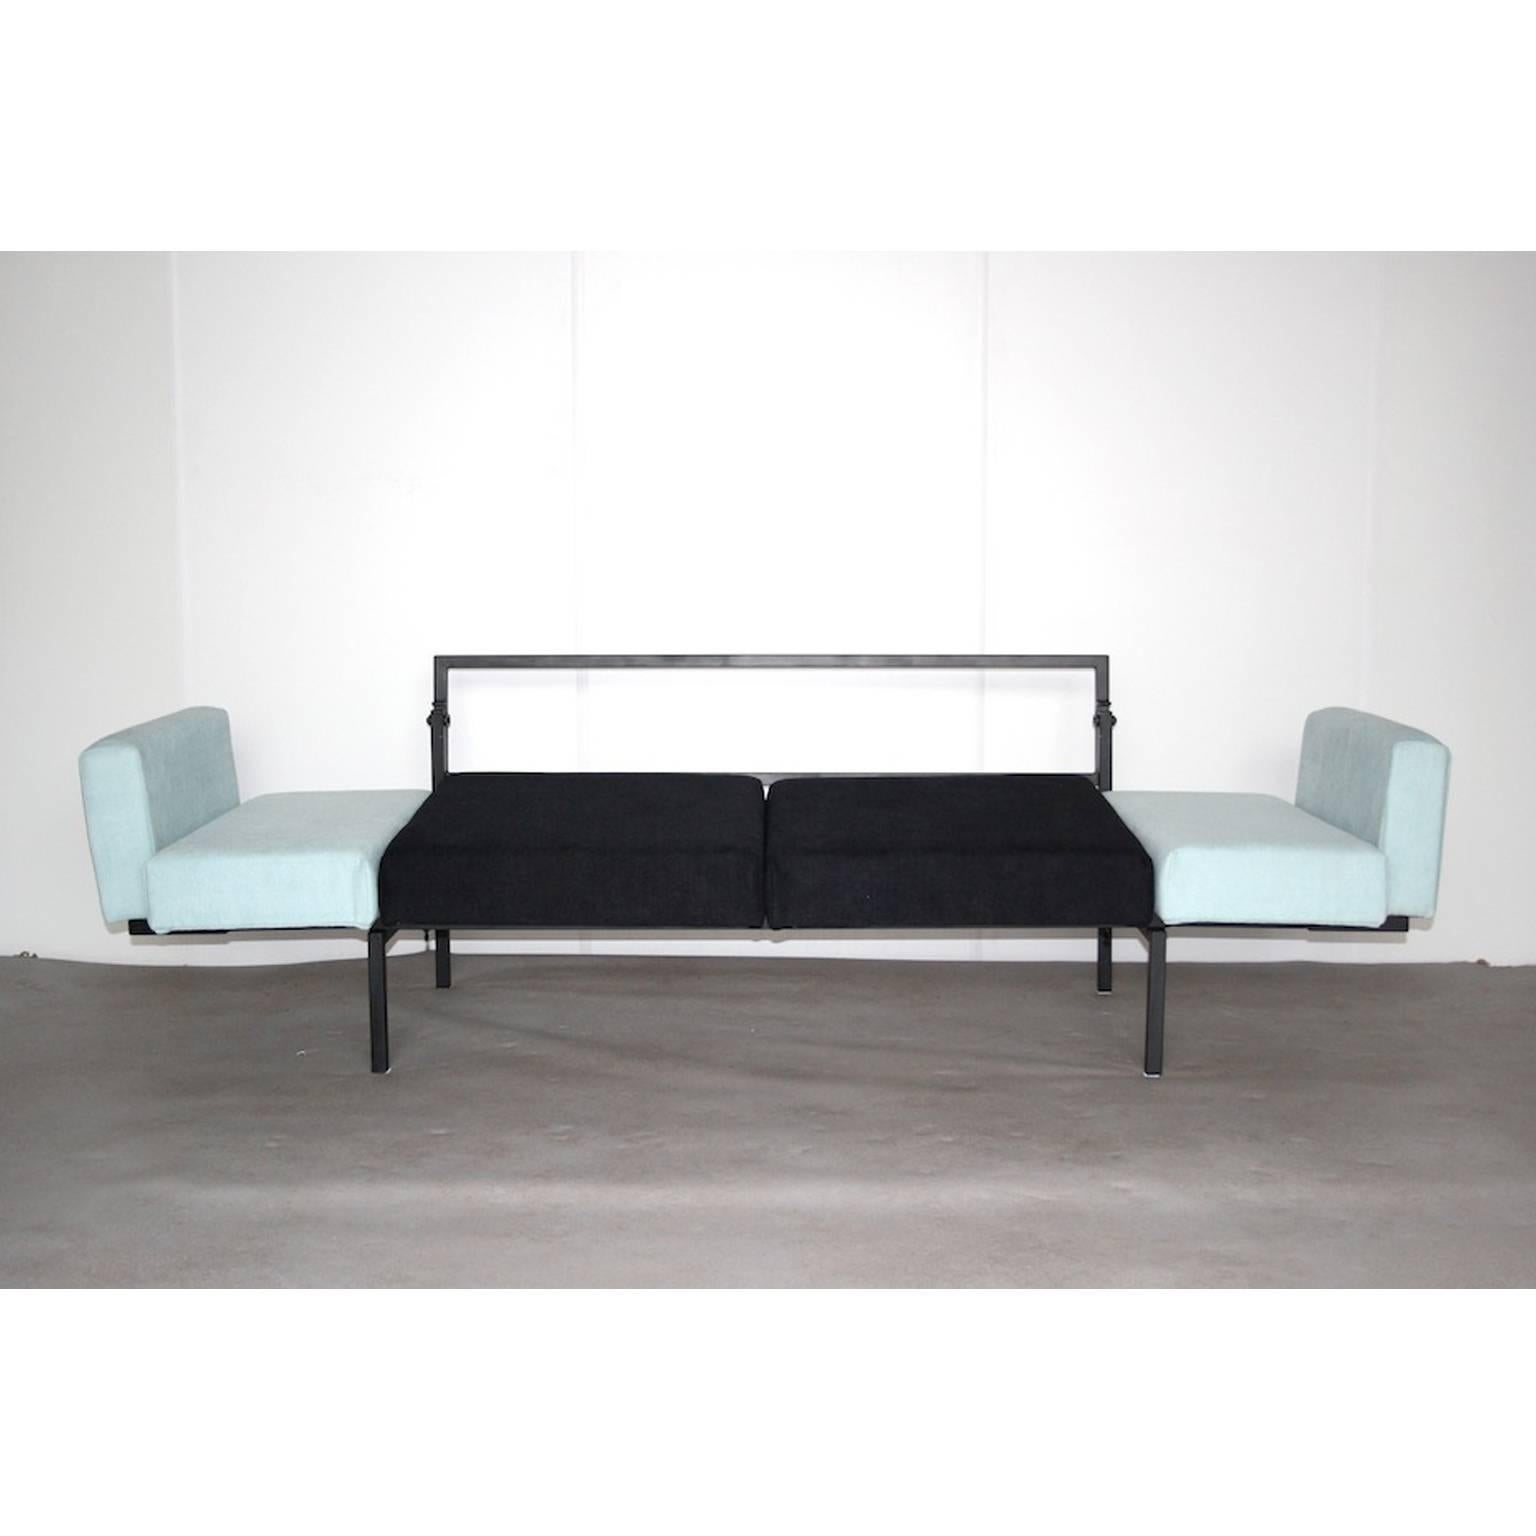 Metal Sofa or Daybed by Coen de Vries for Devo, Dutch Design, 1952 For Sale